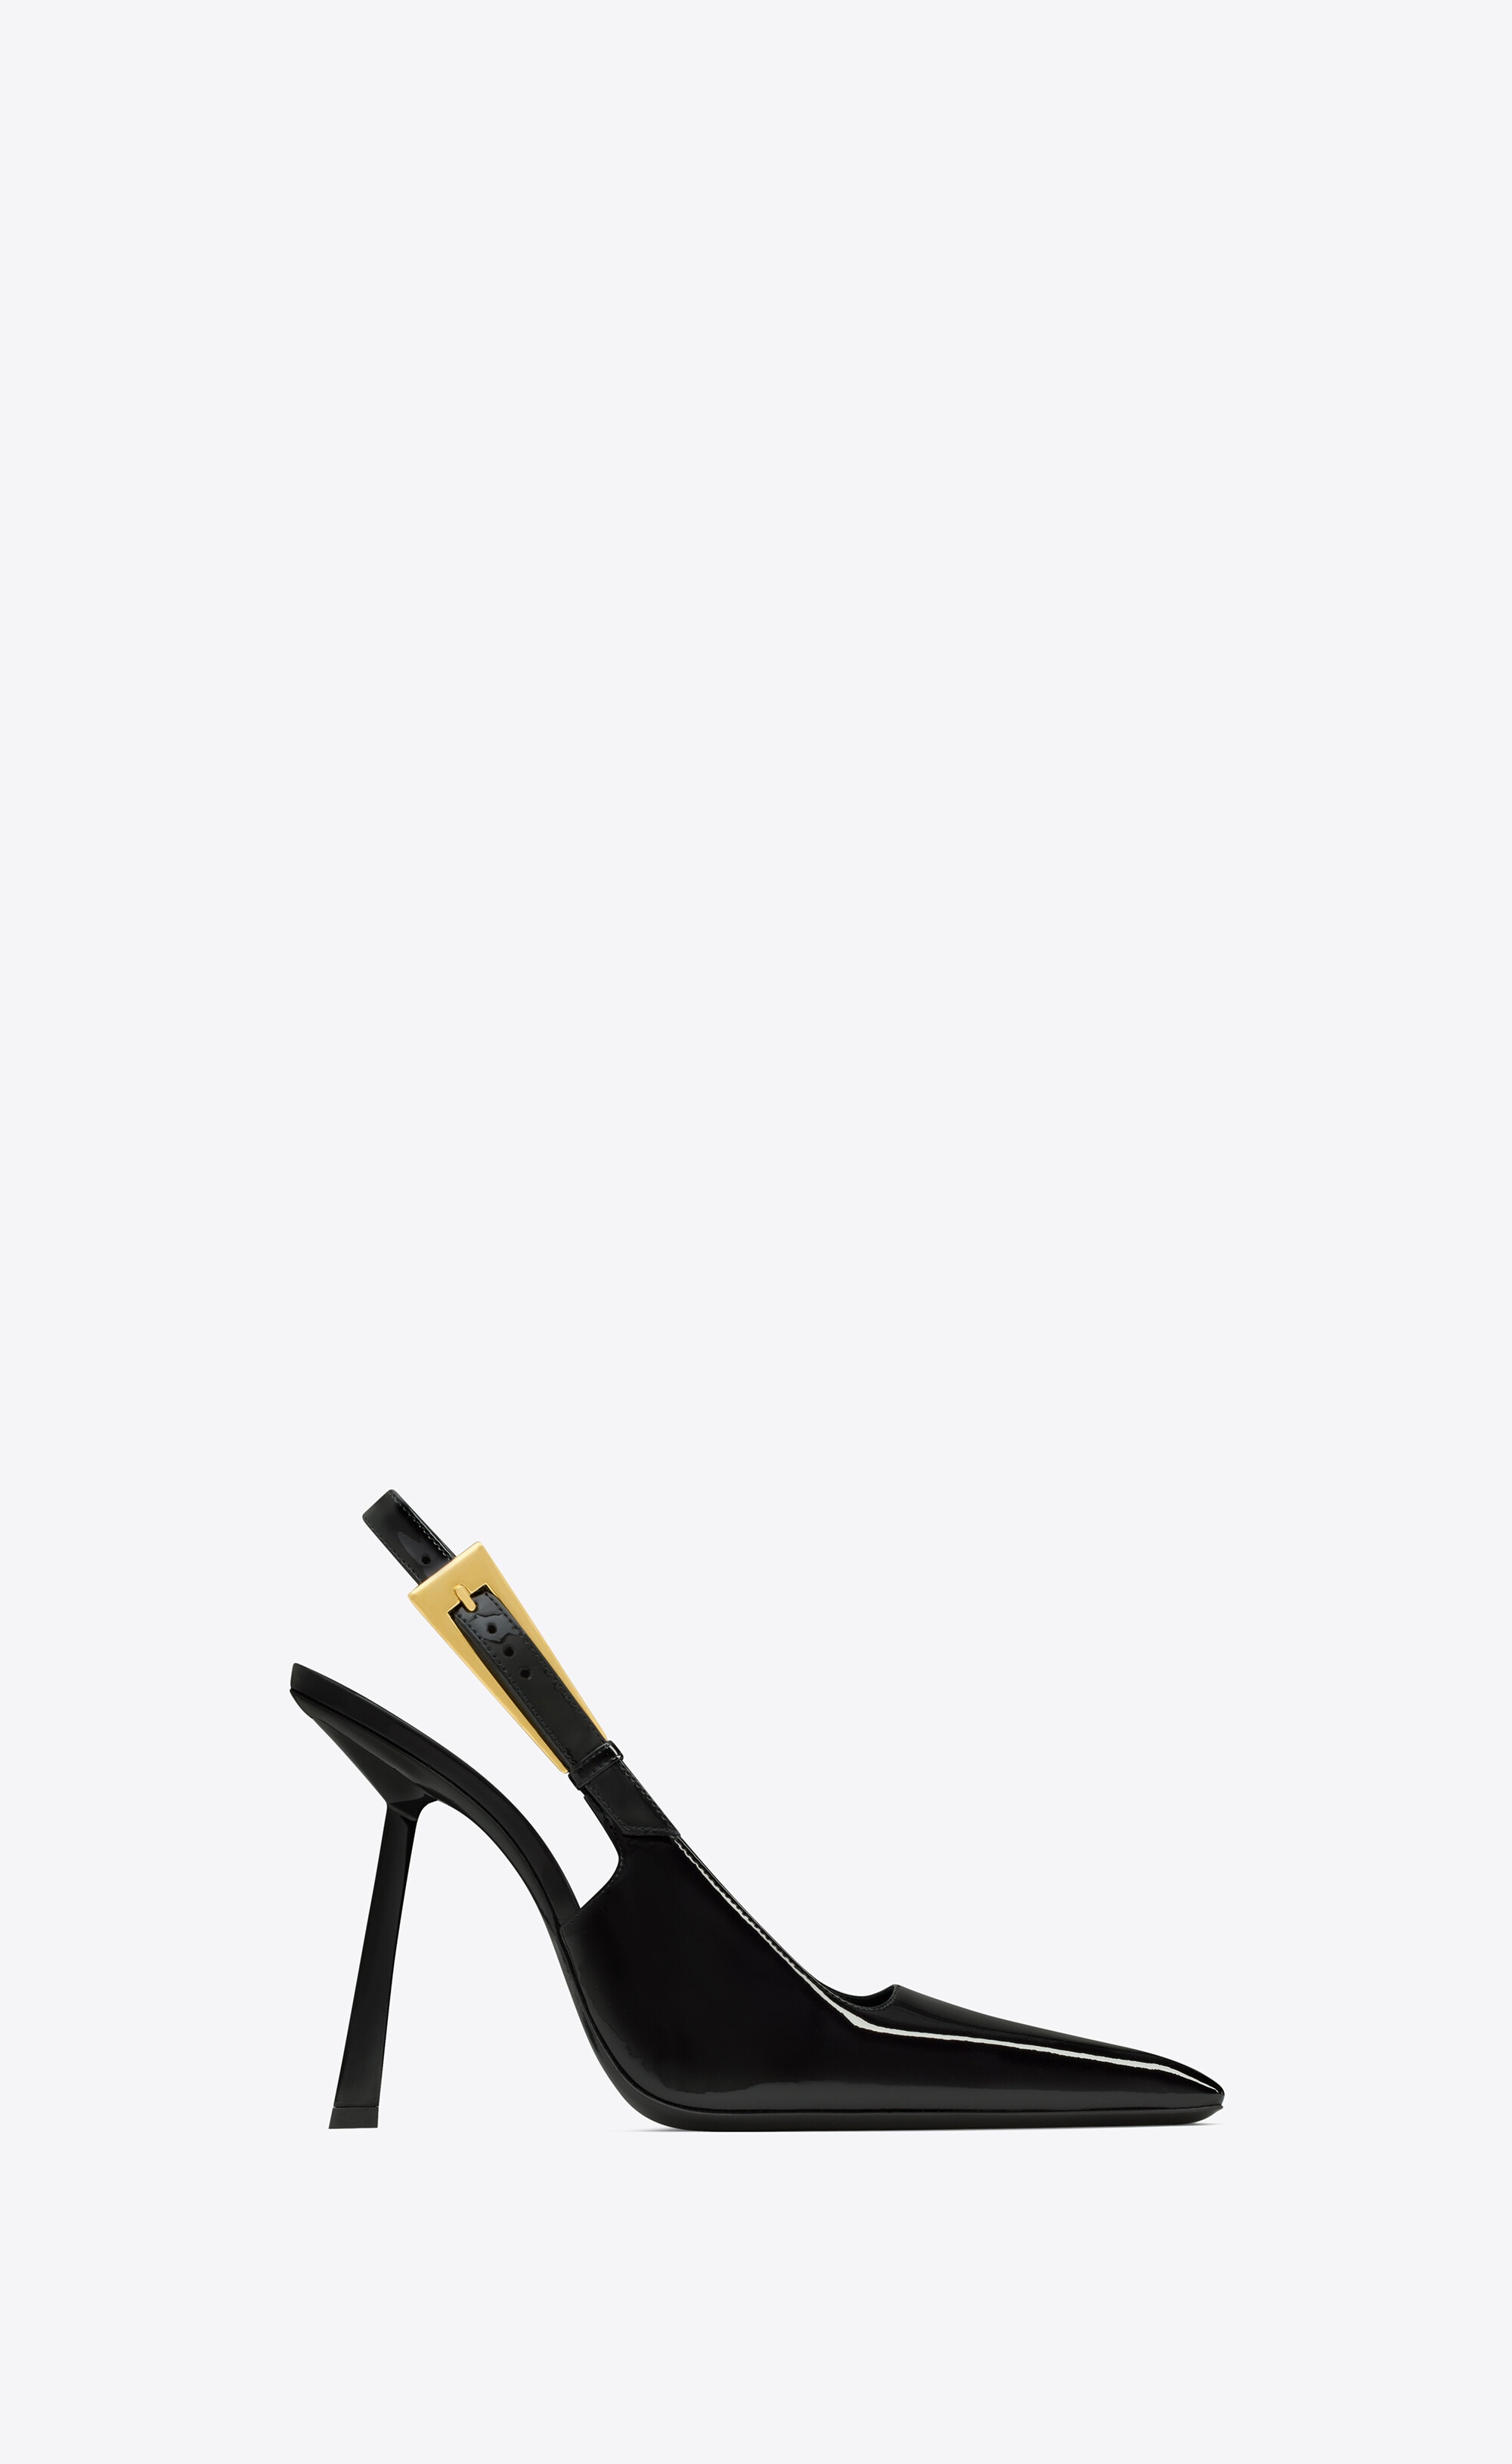 lee slingback pumps in patent leather - 1